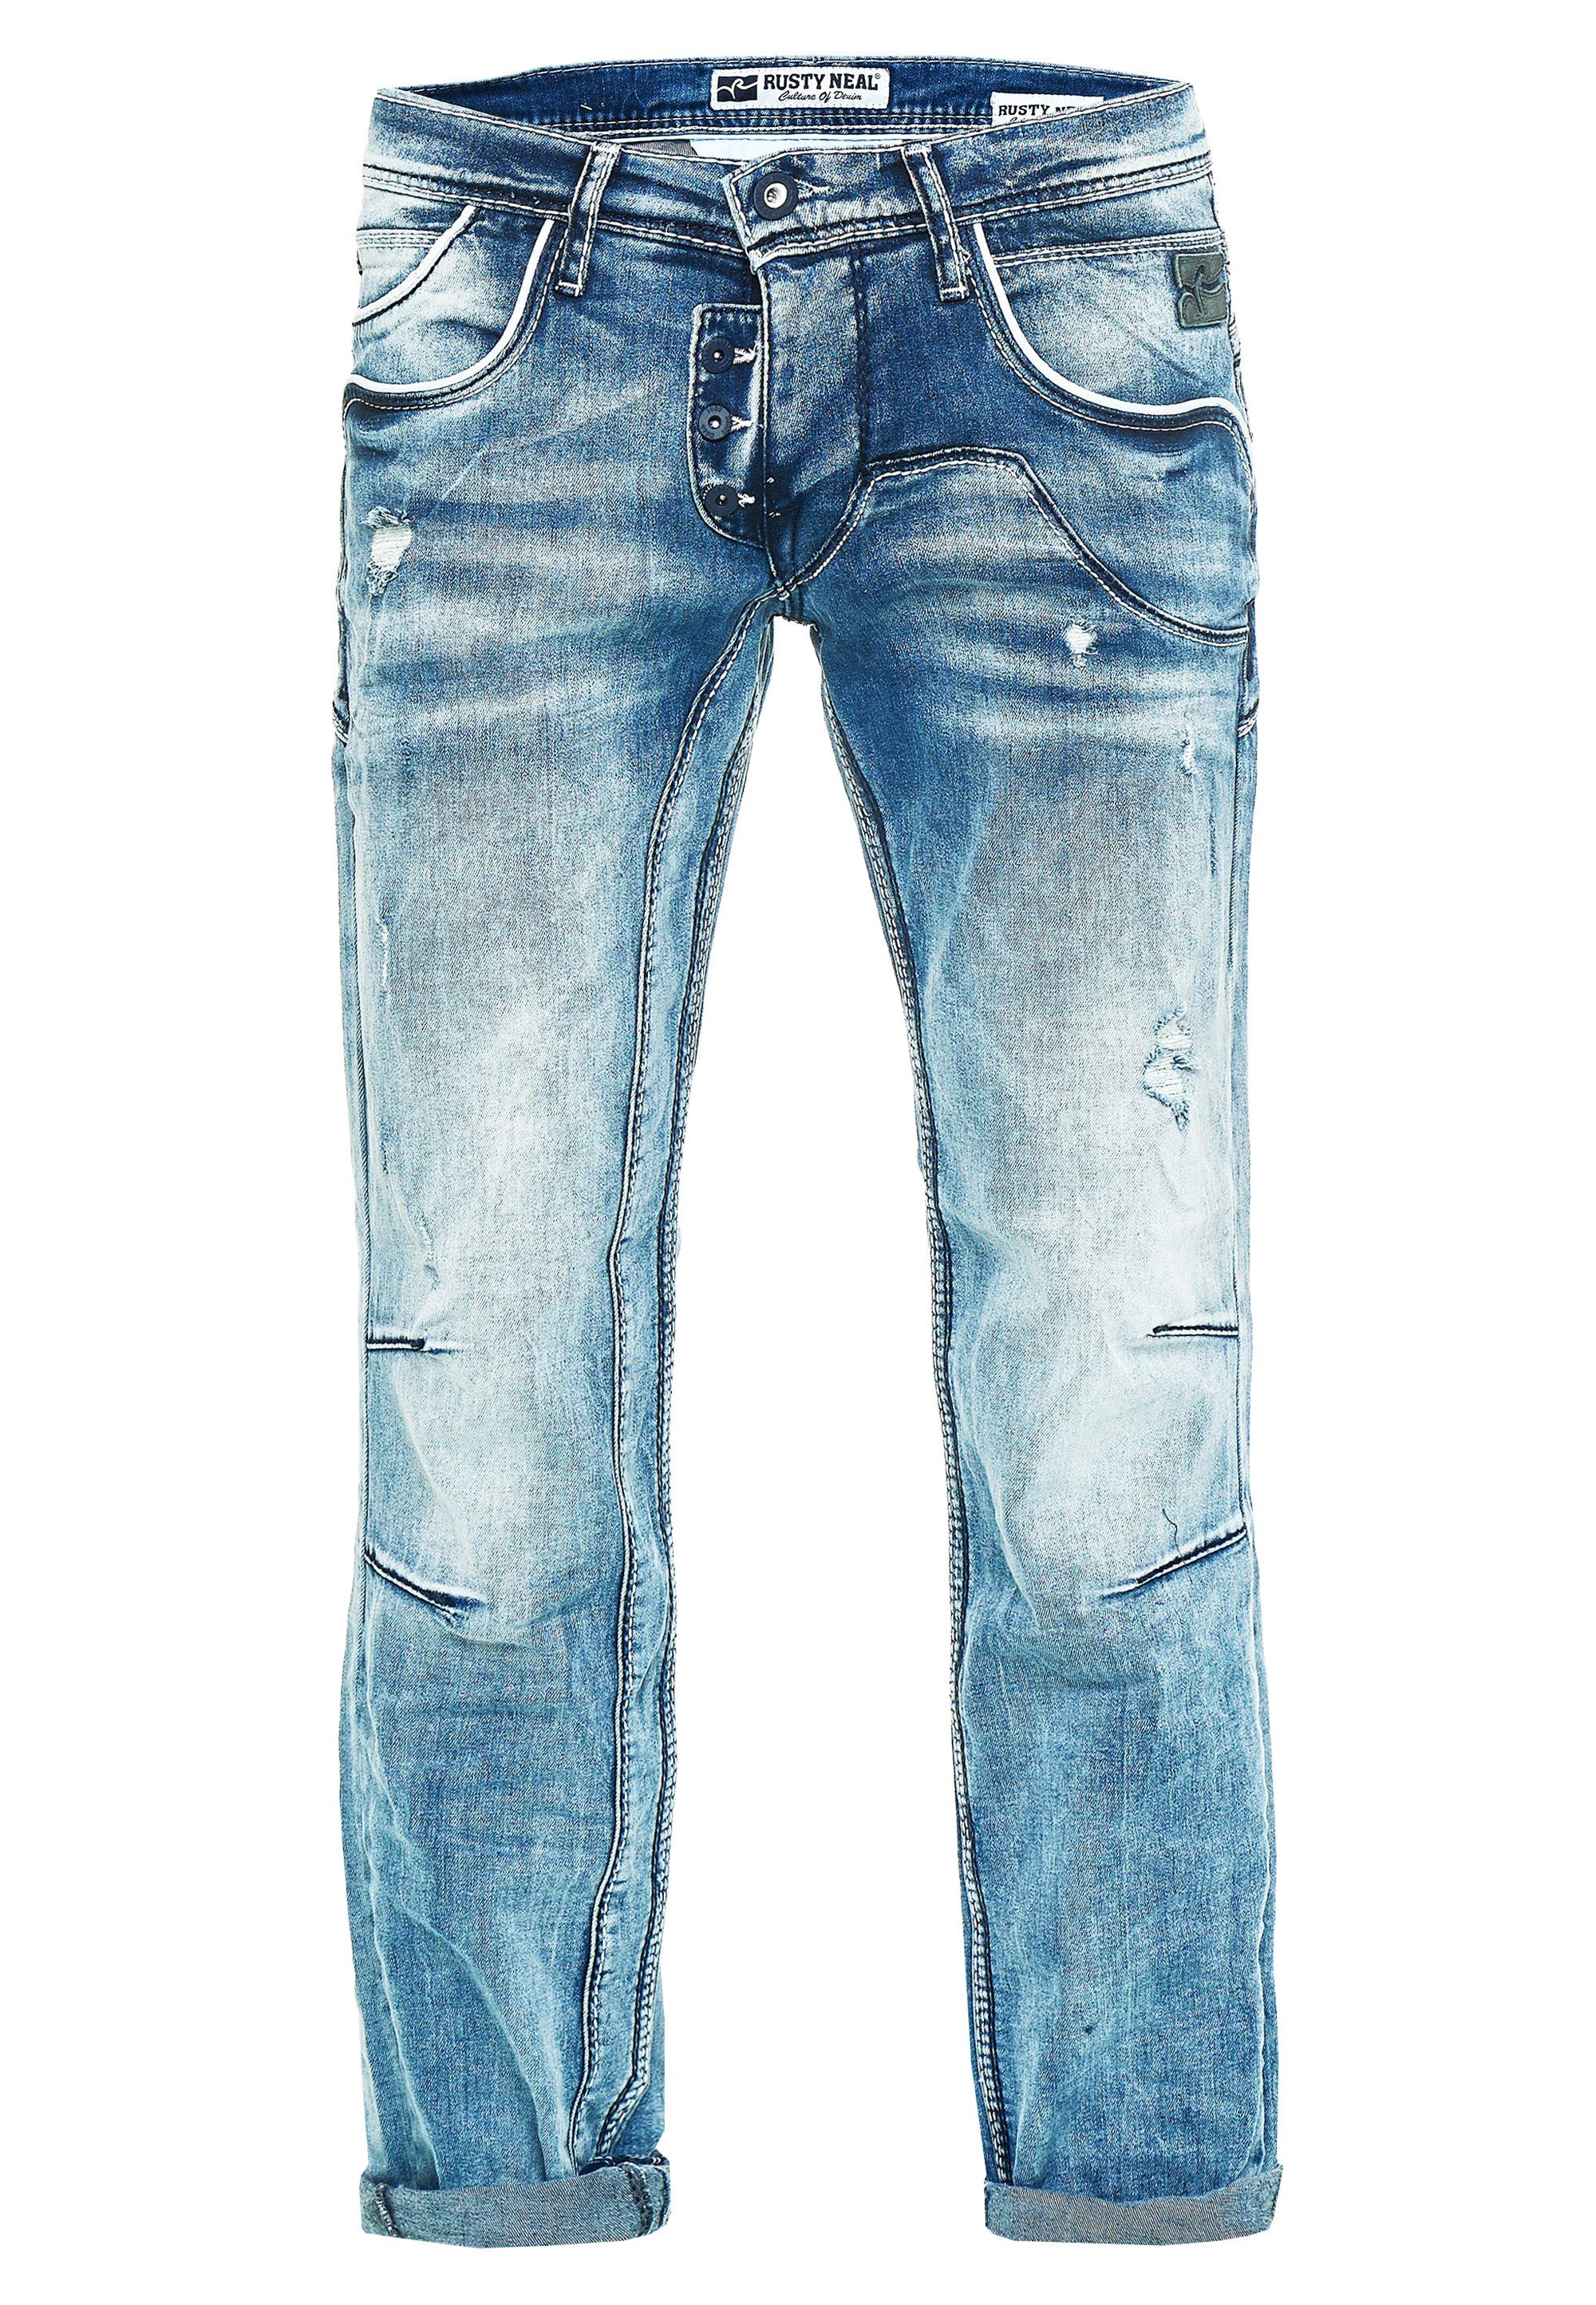 Rusty Neal Jeans mit Waschung cooler Bequeme